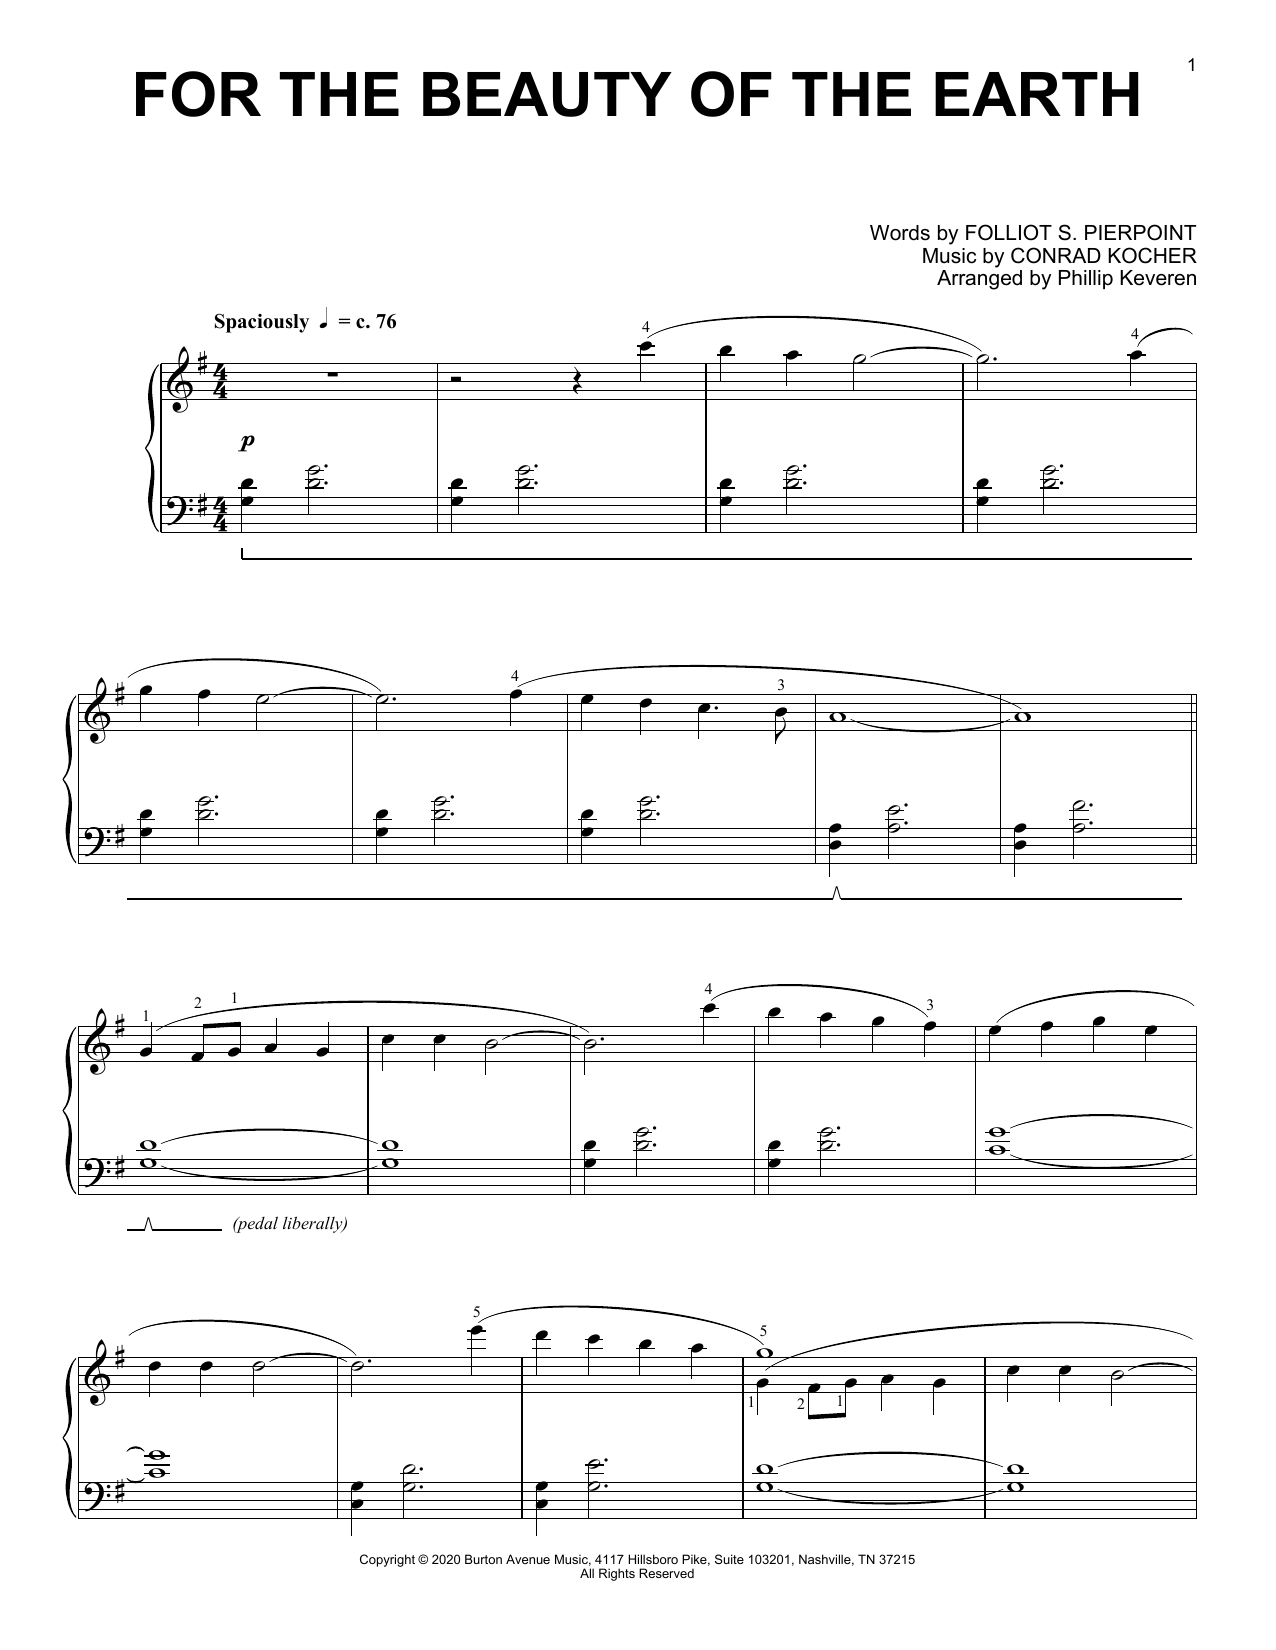 Download Folliot S. Pierpoint and Conrad Koch For The Beauty Of The Earth (arr. Phill Sheet Music